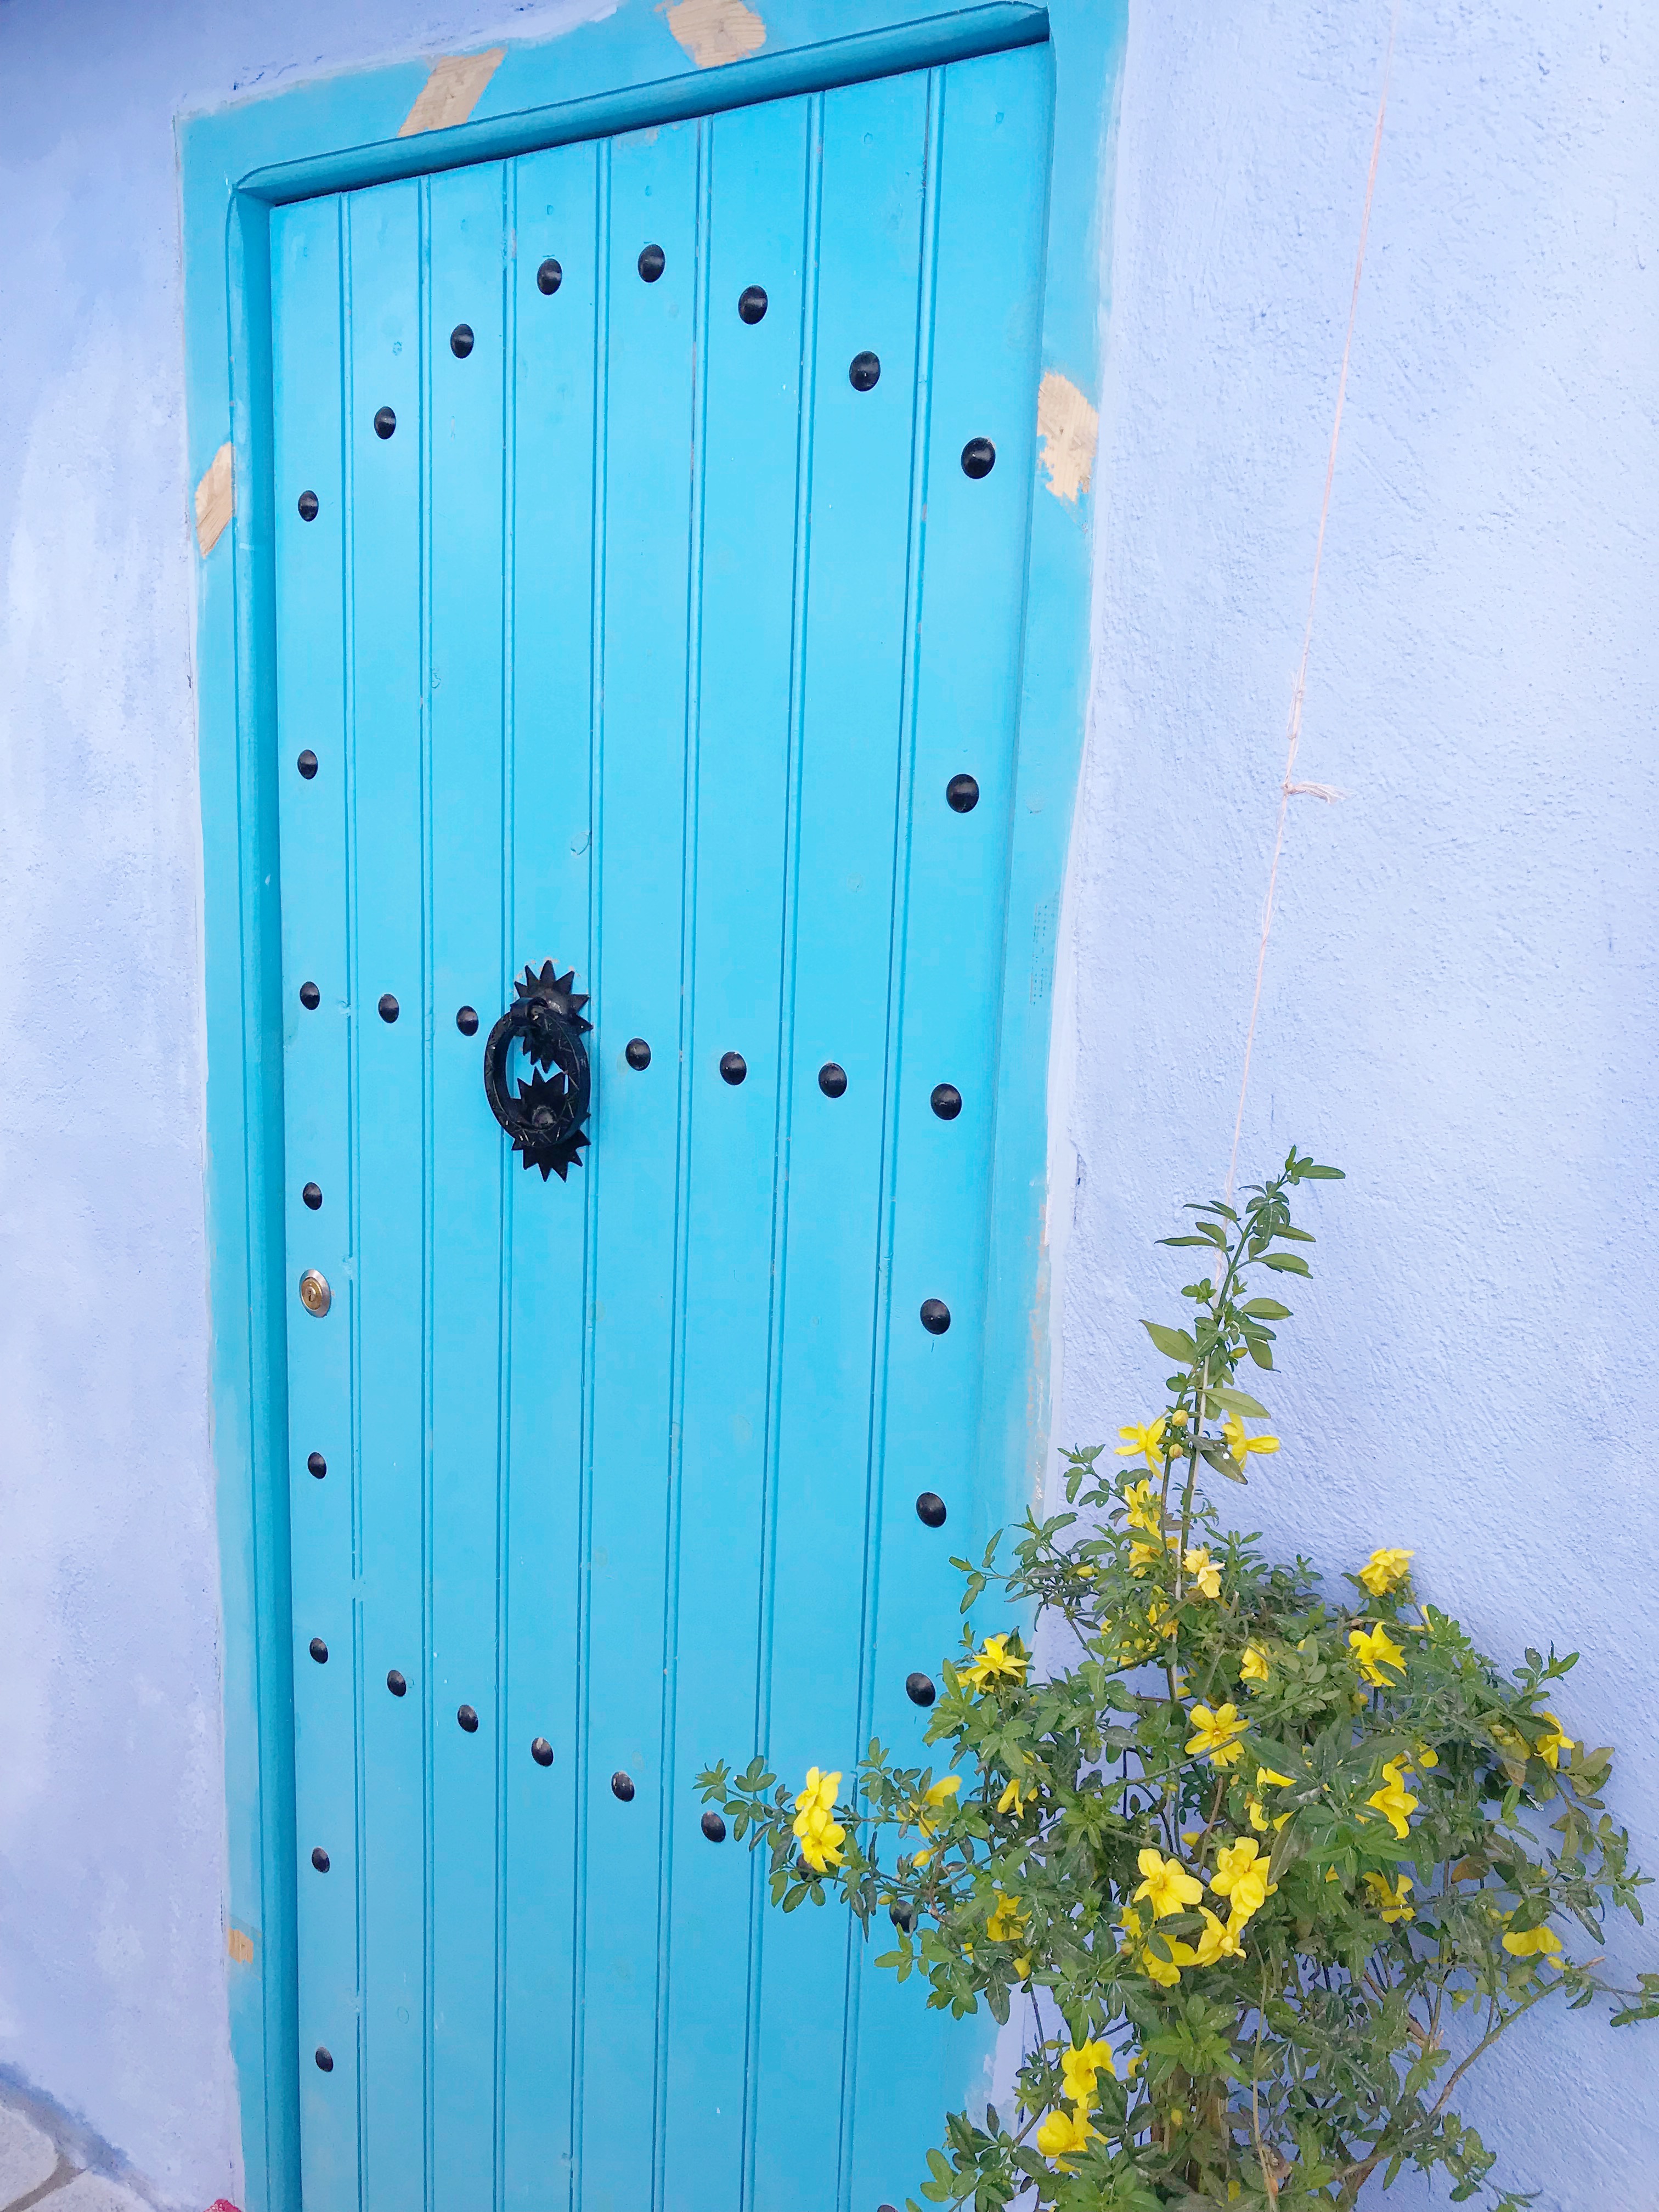 HOW TO SPEND A DAY IN CHEFCHAOUEN | chefchaouen morocco - Chefchaouen - Fes to Chefchaouen - Morocco Blue City - Traveling In Morocco - Day Trip to Chefchaouen - Morocco Travel Blog - Blue City Morocco - City of Chefchaouen - #morocco #chefchaouen #travelblog